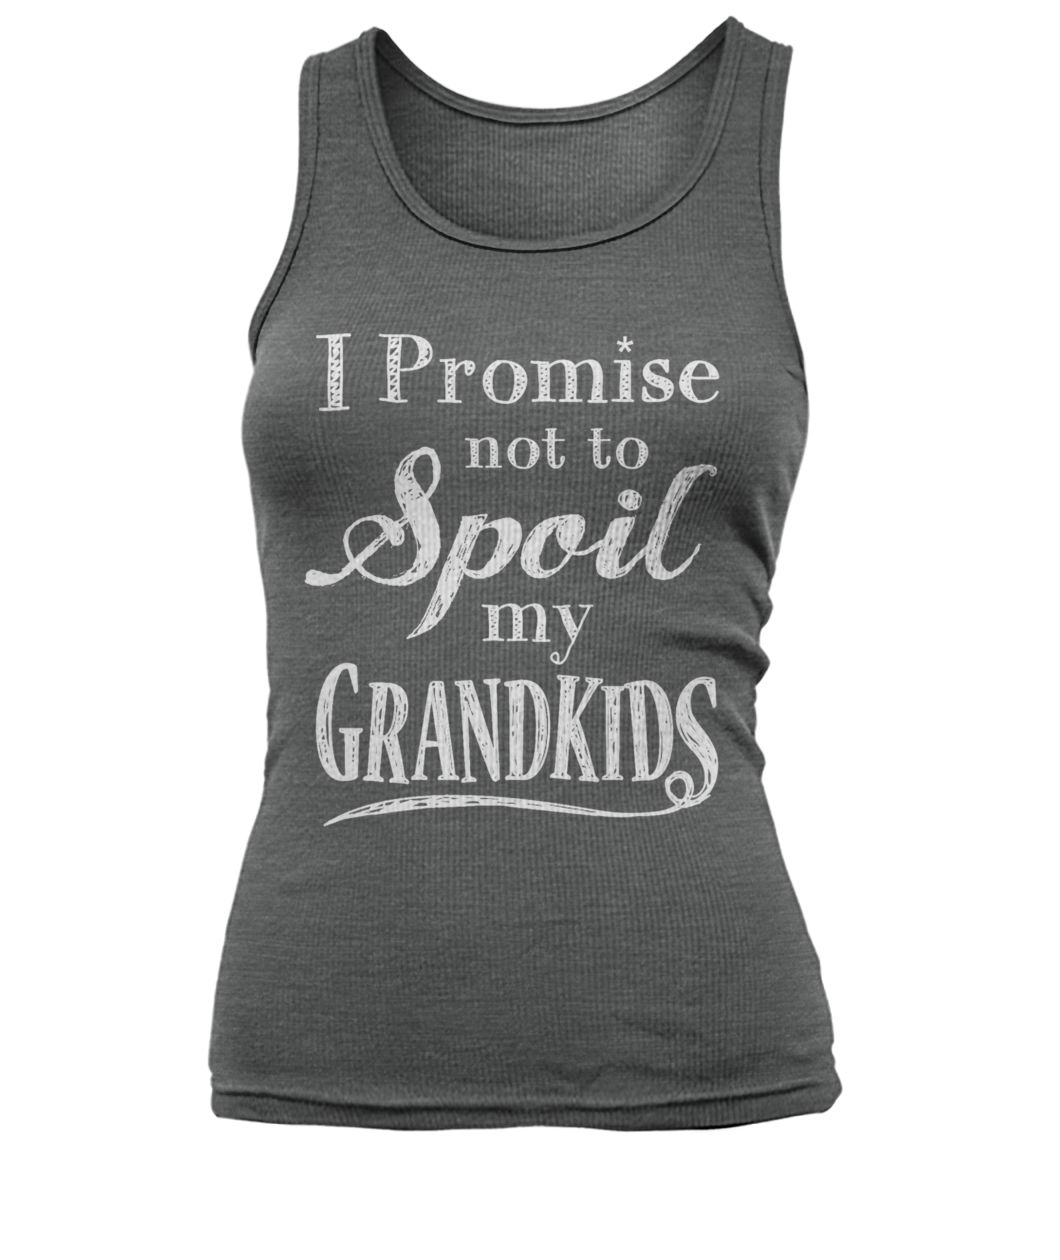 I promise not to spoil my grandkids women's tank top